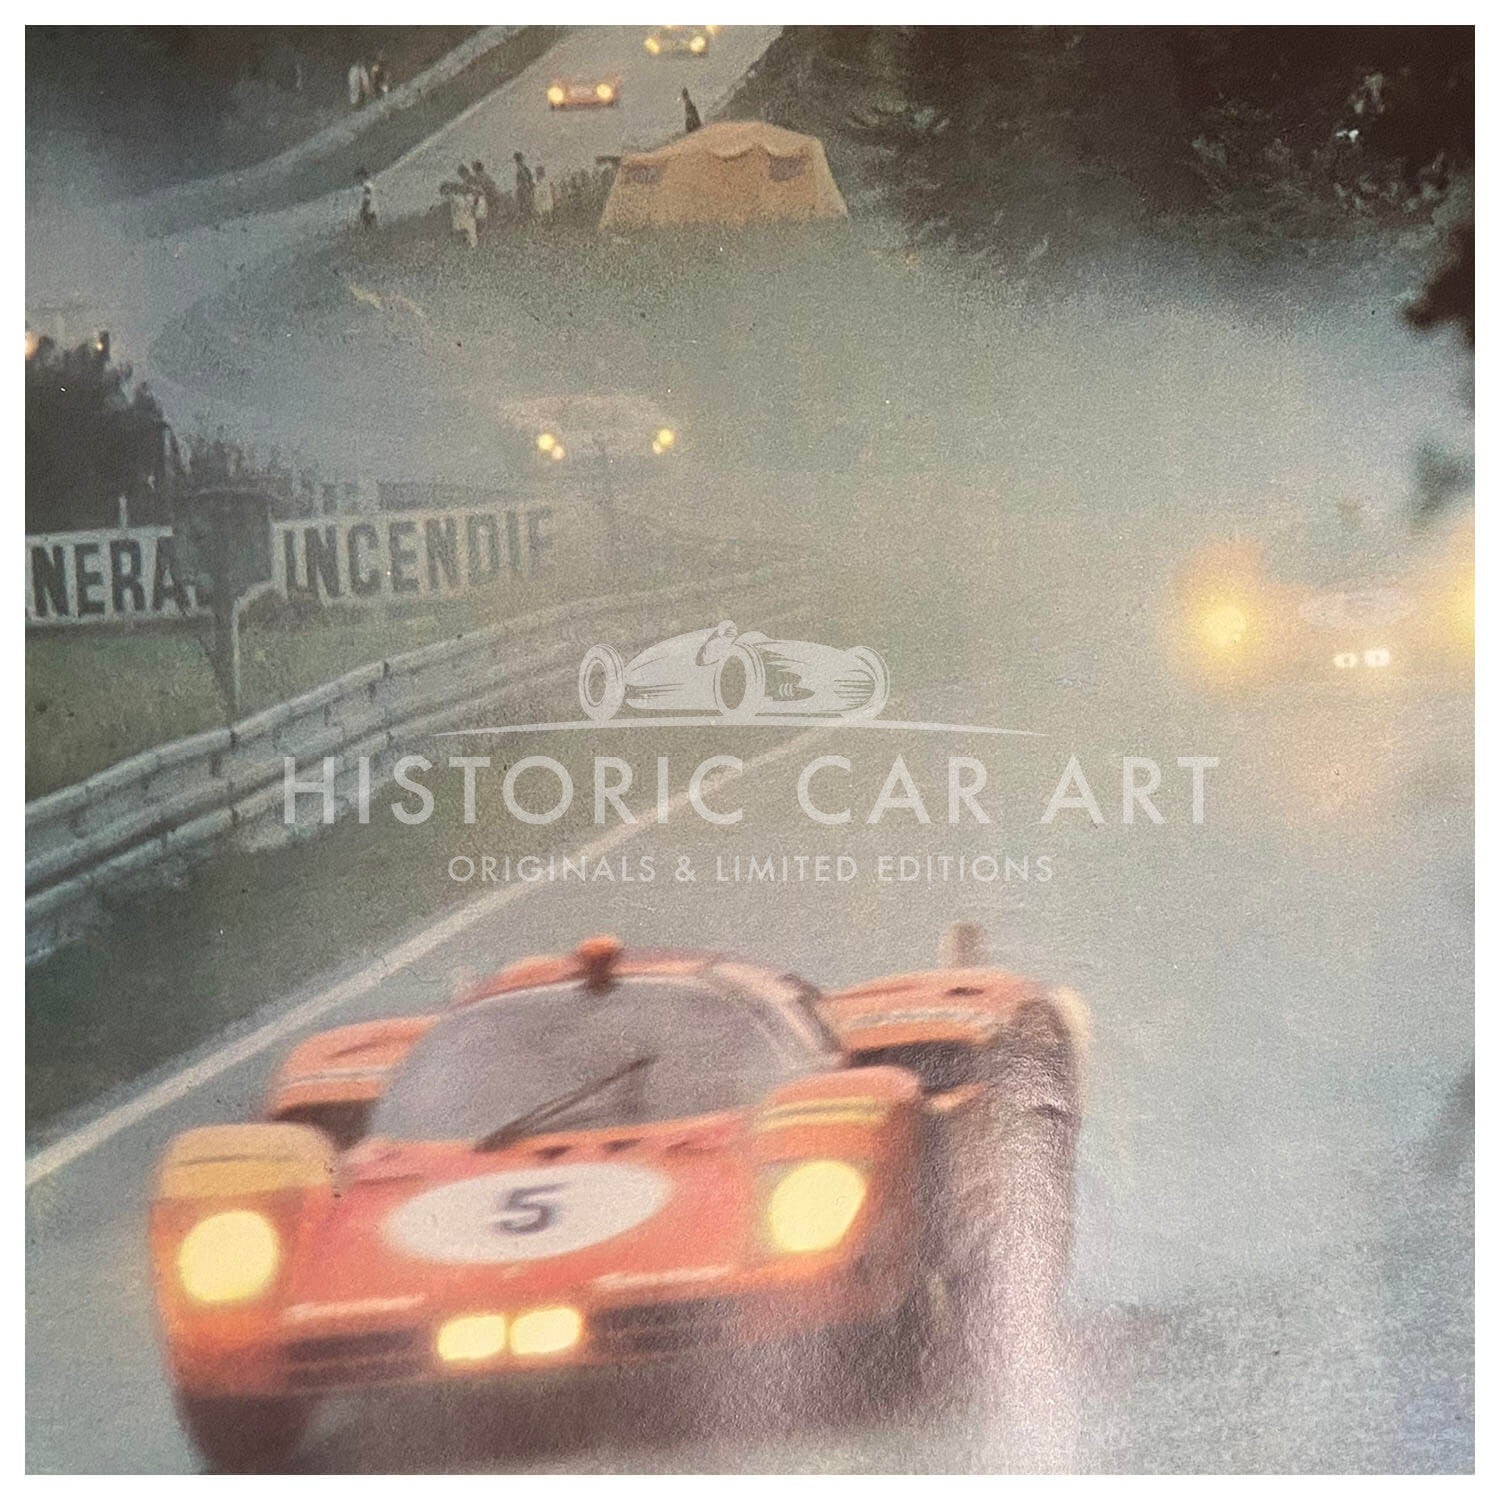 French | Le Mans 24 Hours 1971 Original Poster